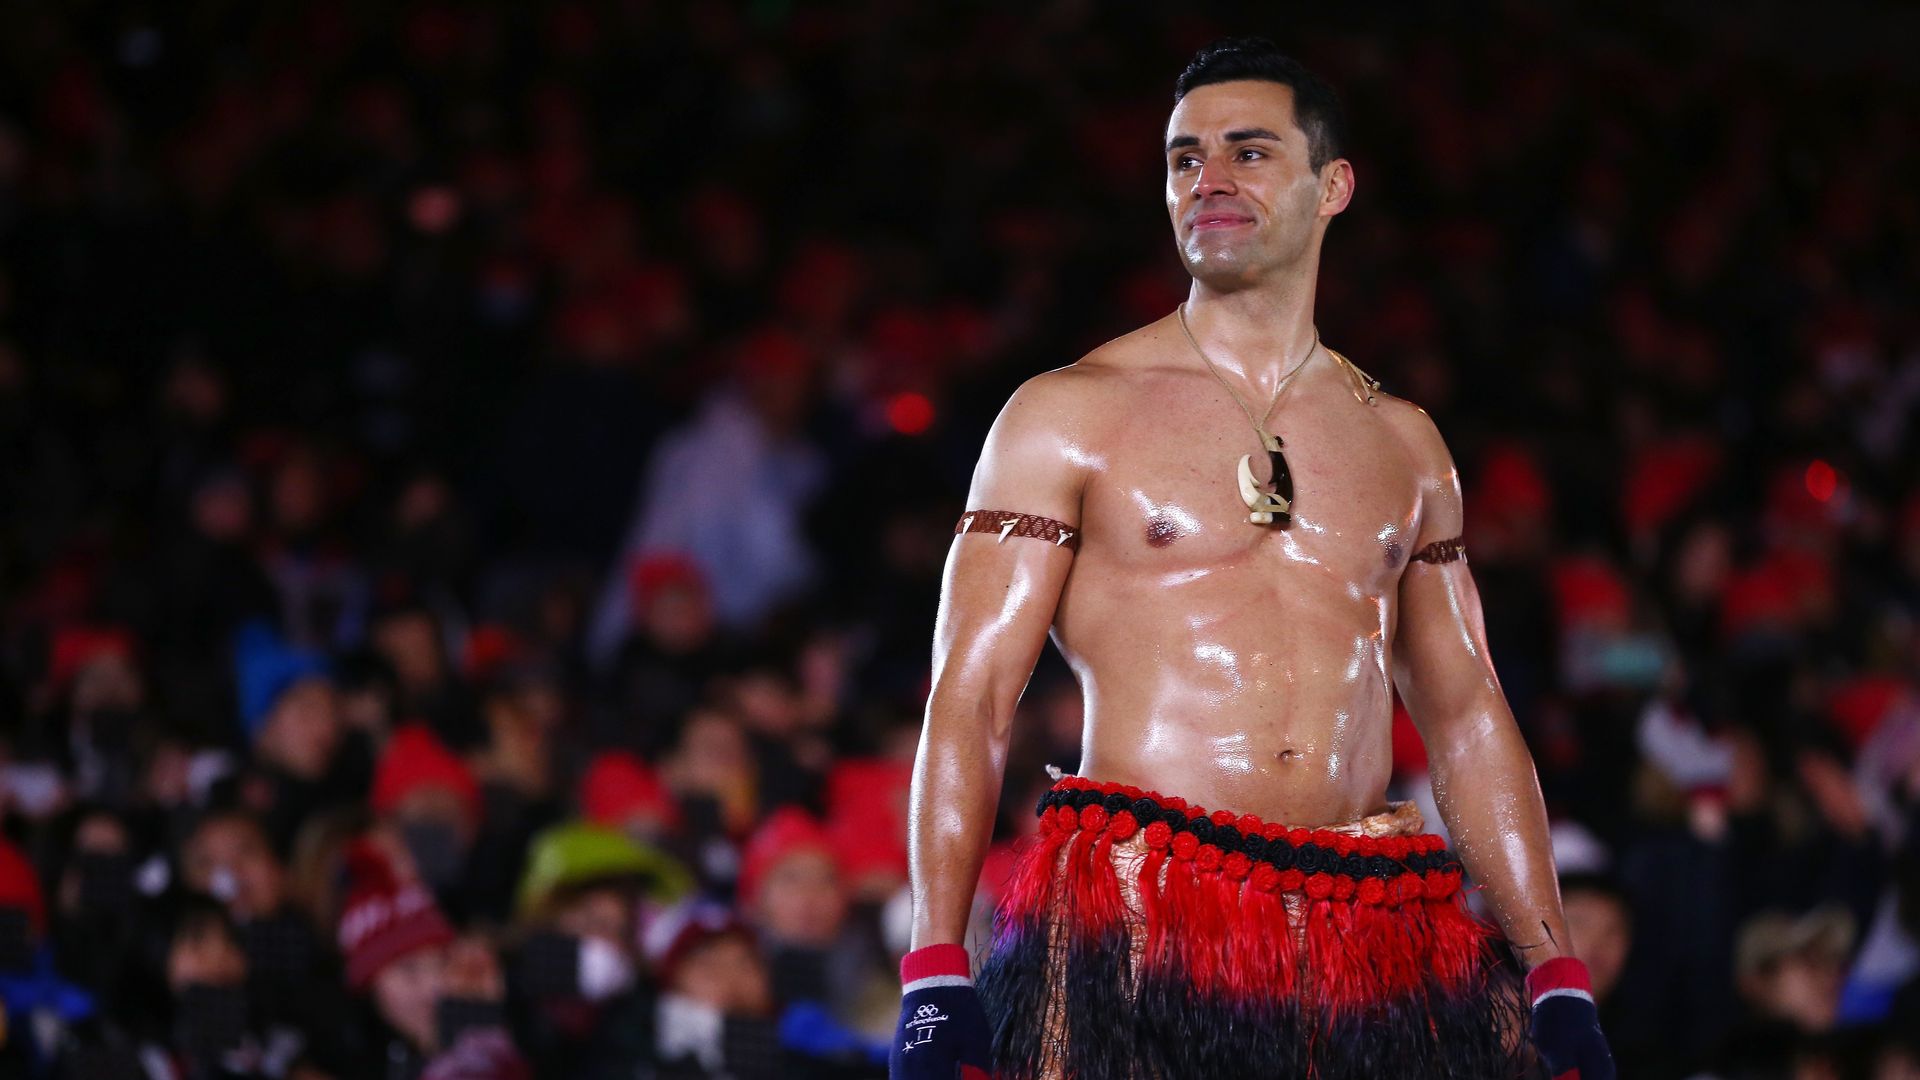 Photo of a shirtless, oiled up Pita Taufatofua wearing red and black traditional clothing on the bottom and smiling at the crowd